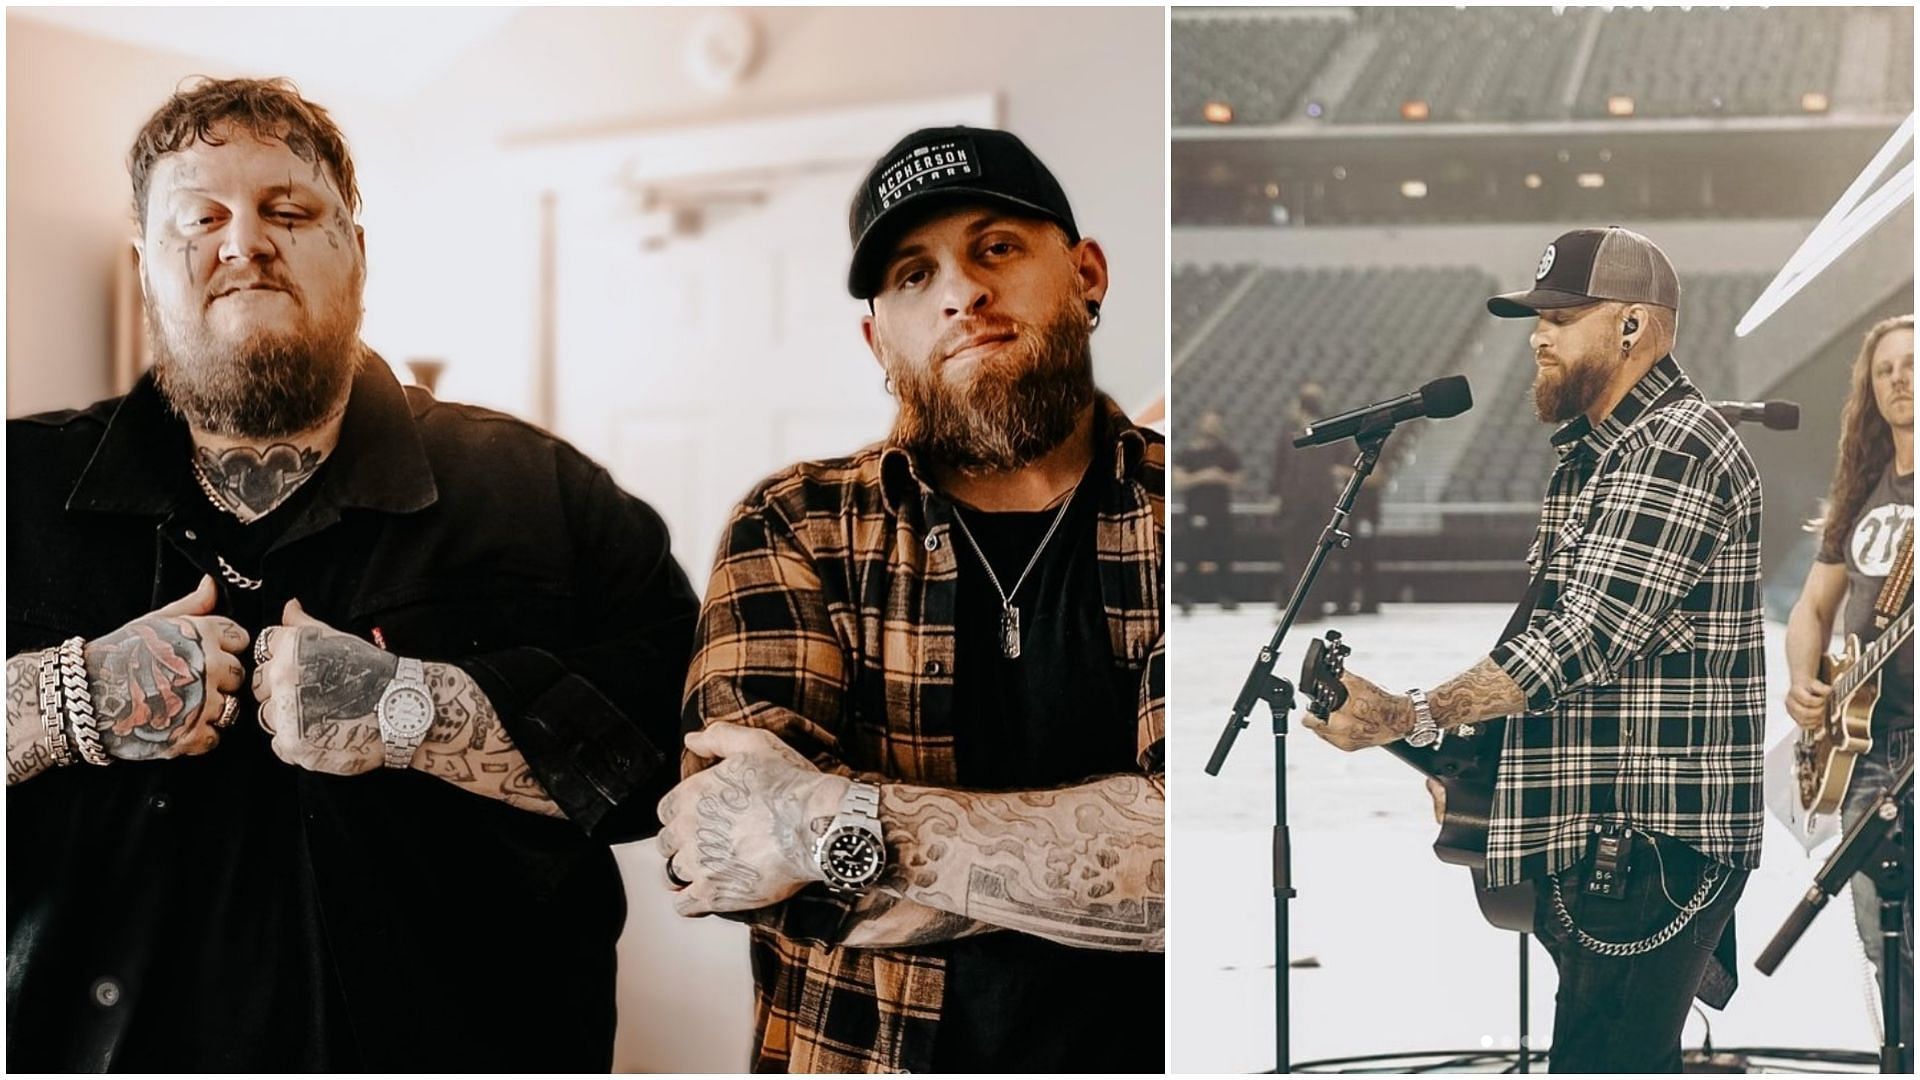 Brantley Gilbert and Jelly Roll are joining forces for the Dirty South Tour (Images via @brantleygilbert and @jellyroll615)